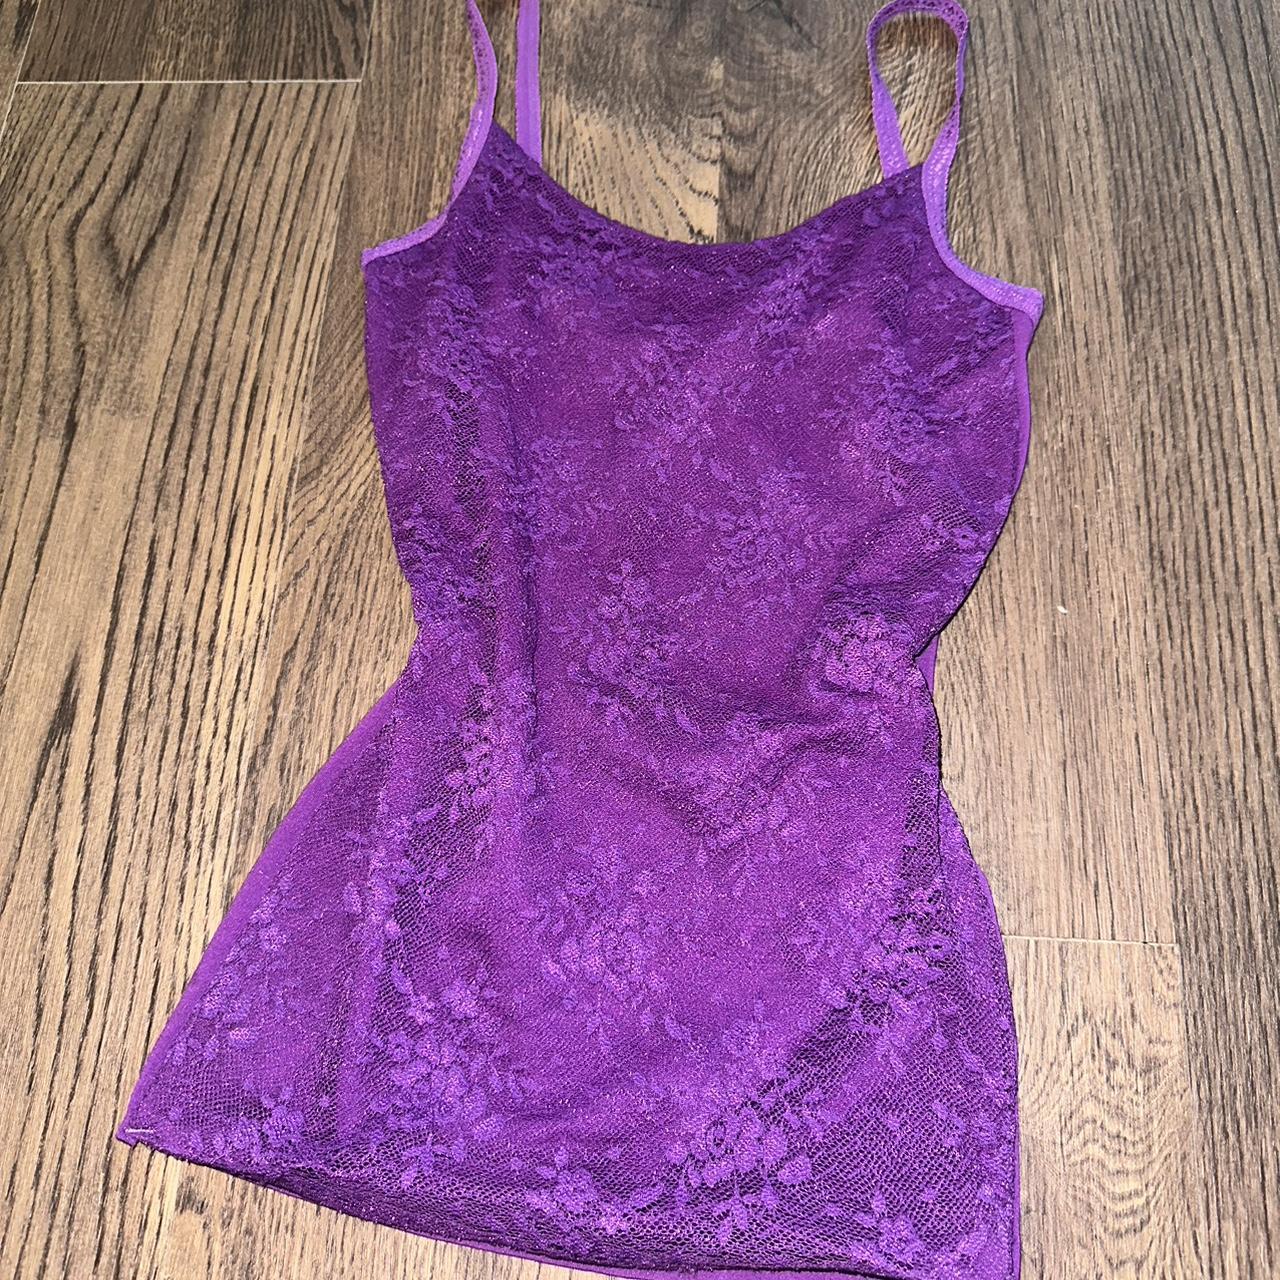 y2k purple lace cami size one size (best fits small) - Depop